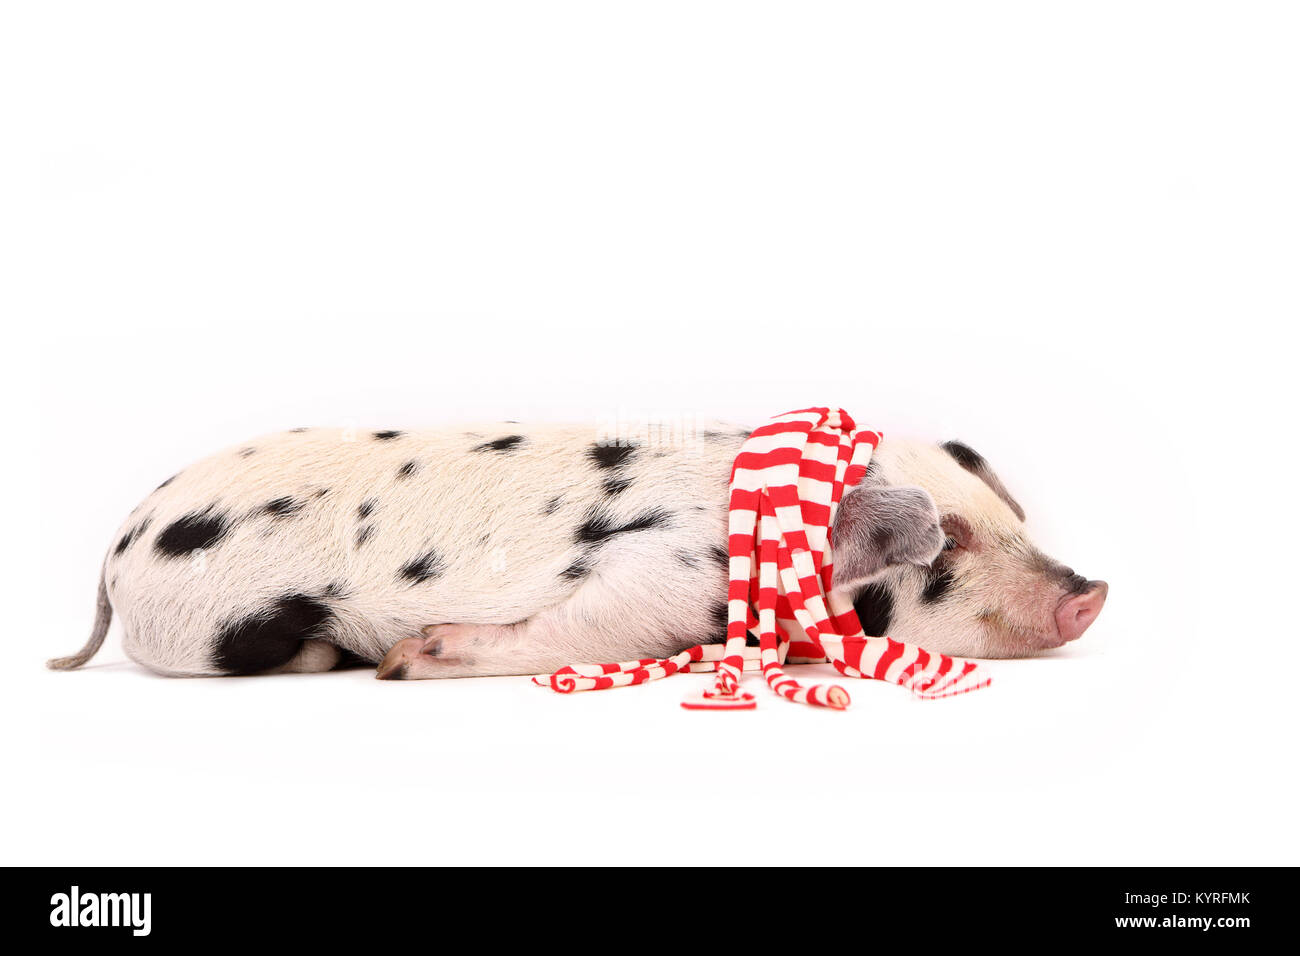 Domestic Pig, Turopolje x ?. Piglet (3 weeks old) lying, wearing a red-and-white scarf. Studio picture seen against a white background. Germany Stock Photo